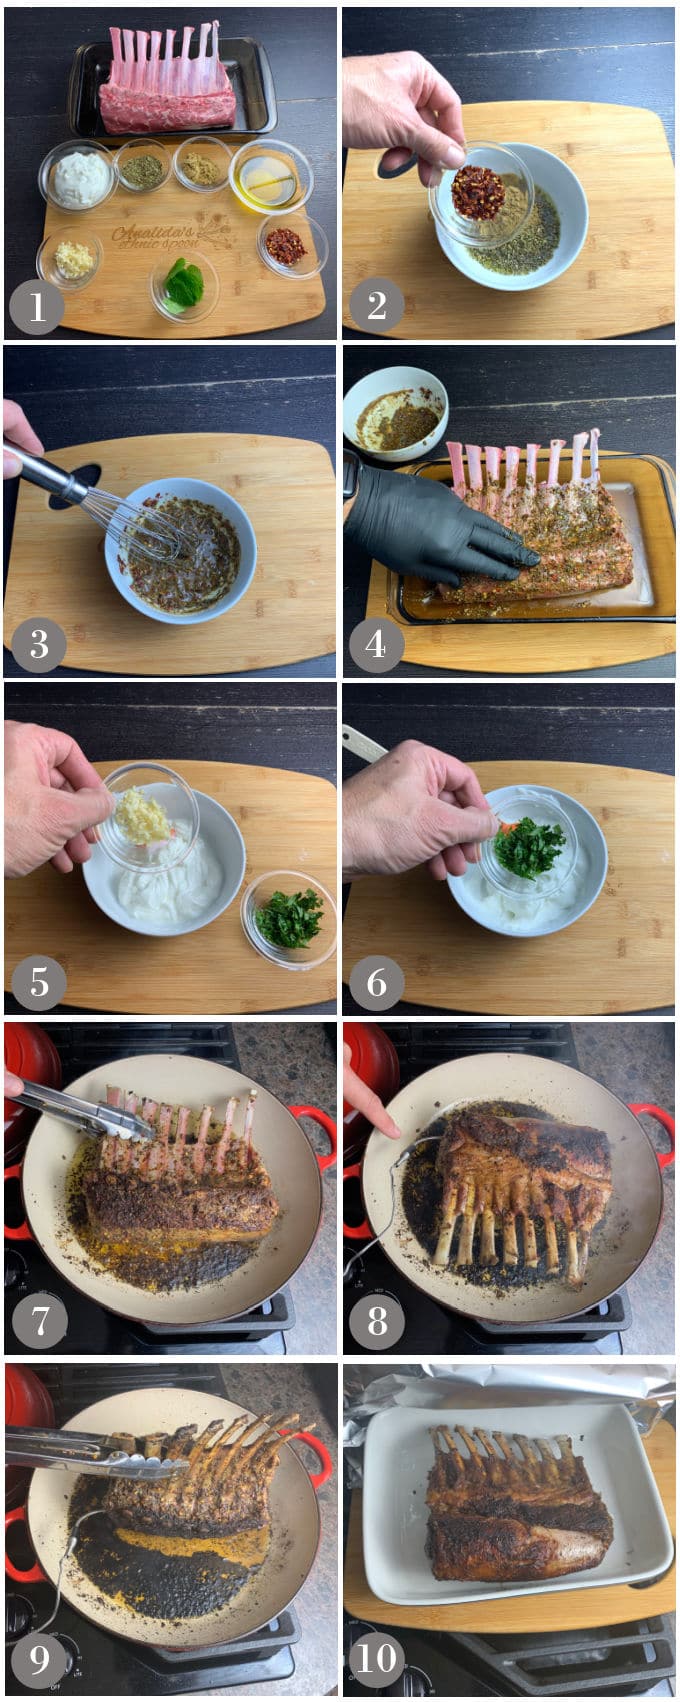 A collage of photos showing the steps to make Turkish style rack of lamb on a stove in a pan.